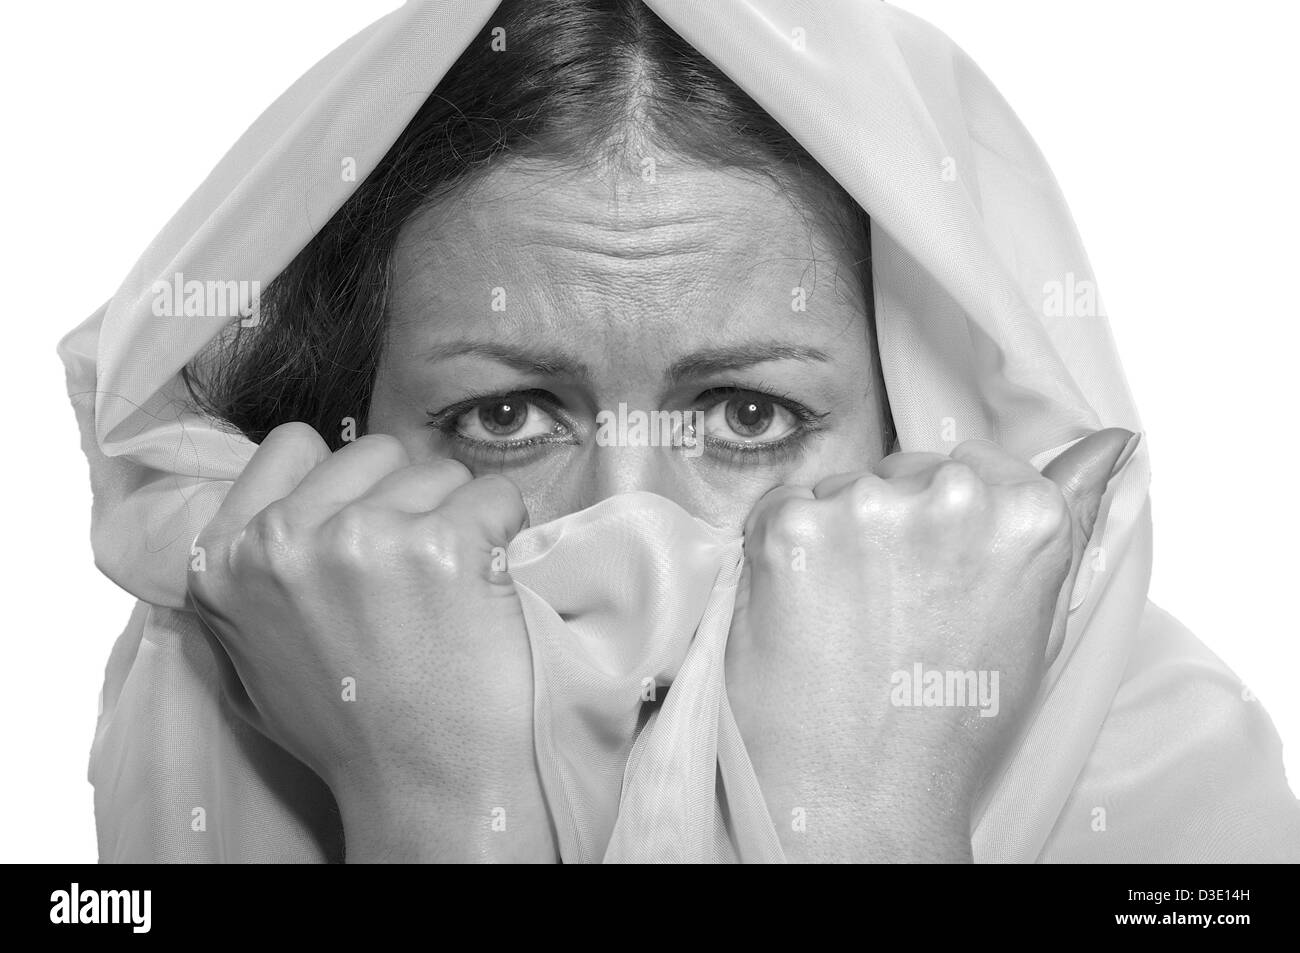 scared girl in white hijab isolated on white background, monochrome image Stock Photo